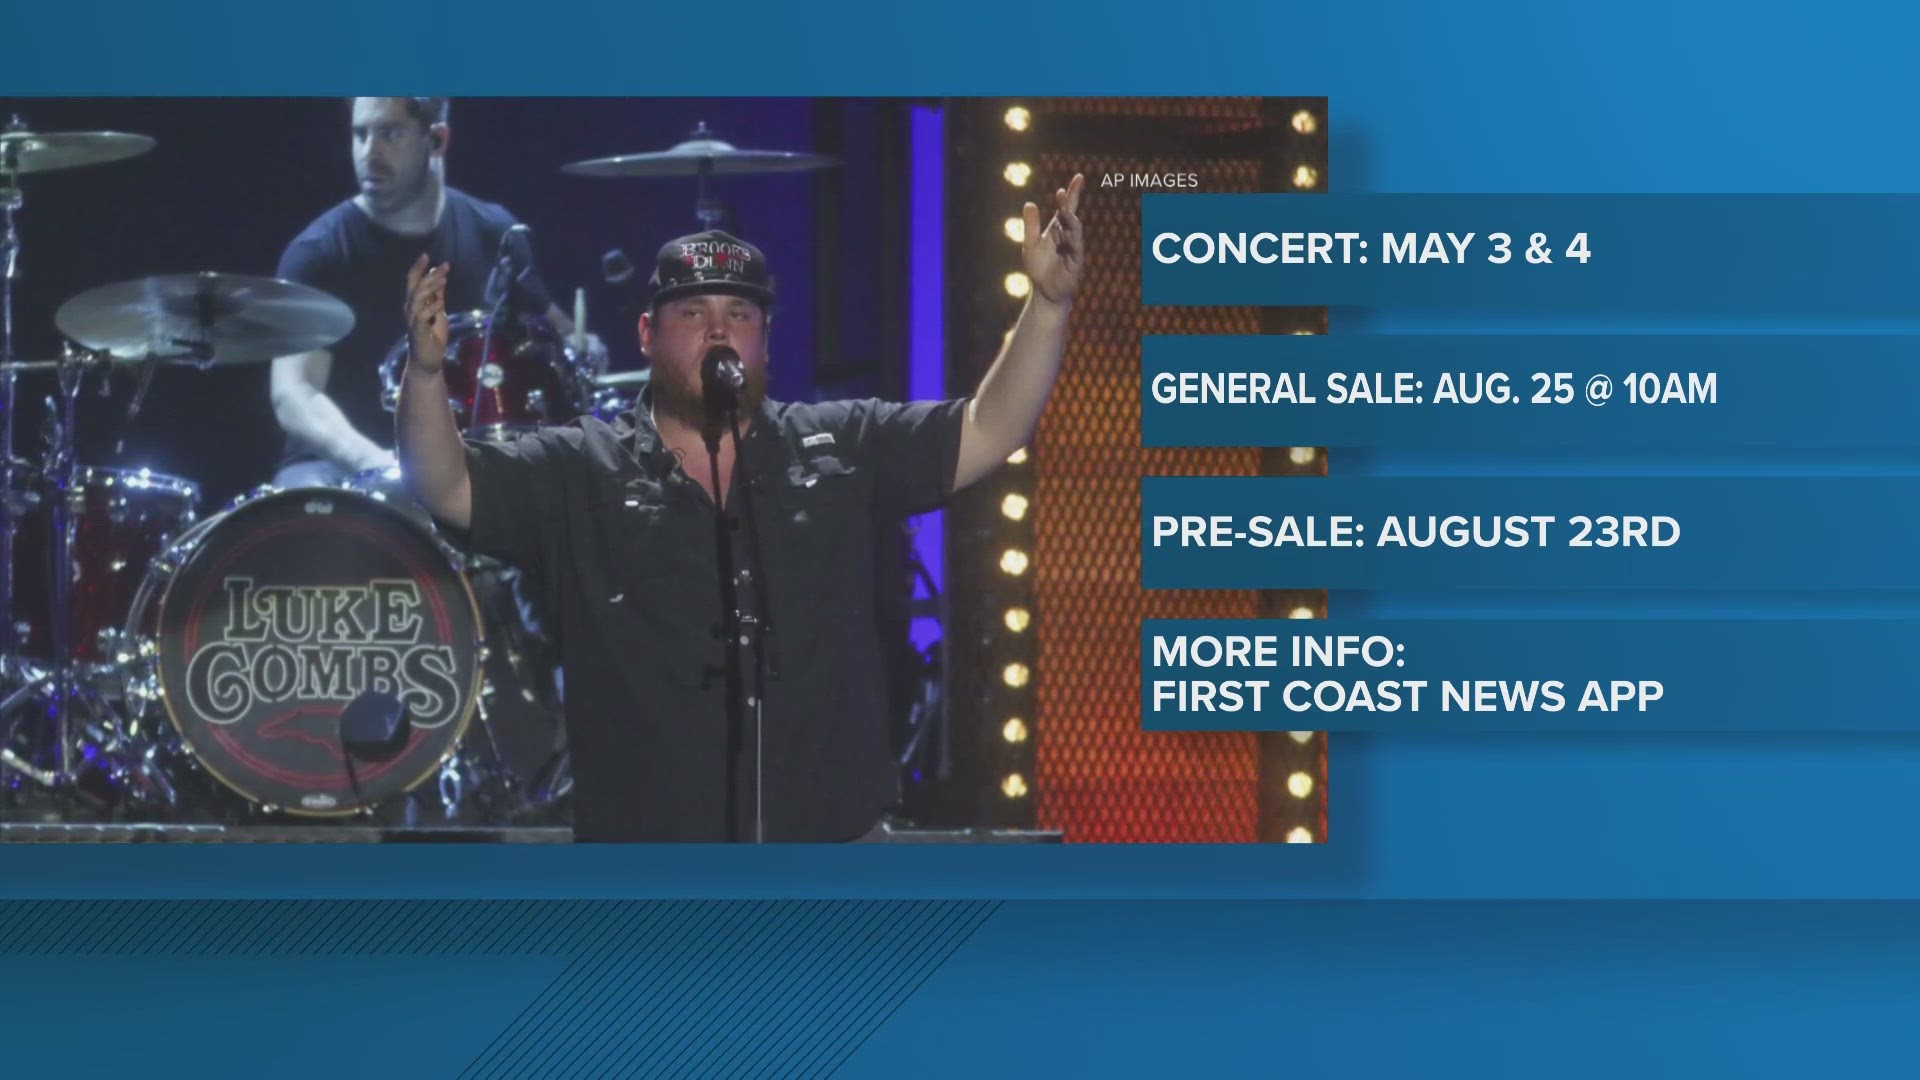 Luke Combs, CMA Entertainer of the Year, announced 25 U.S. stadium shows, including two at EverBank.